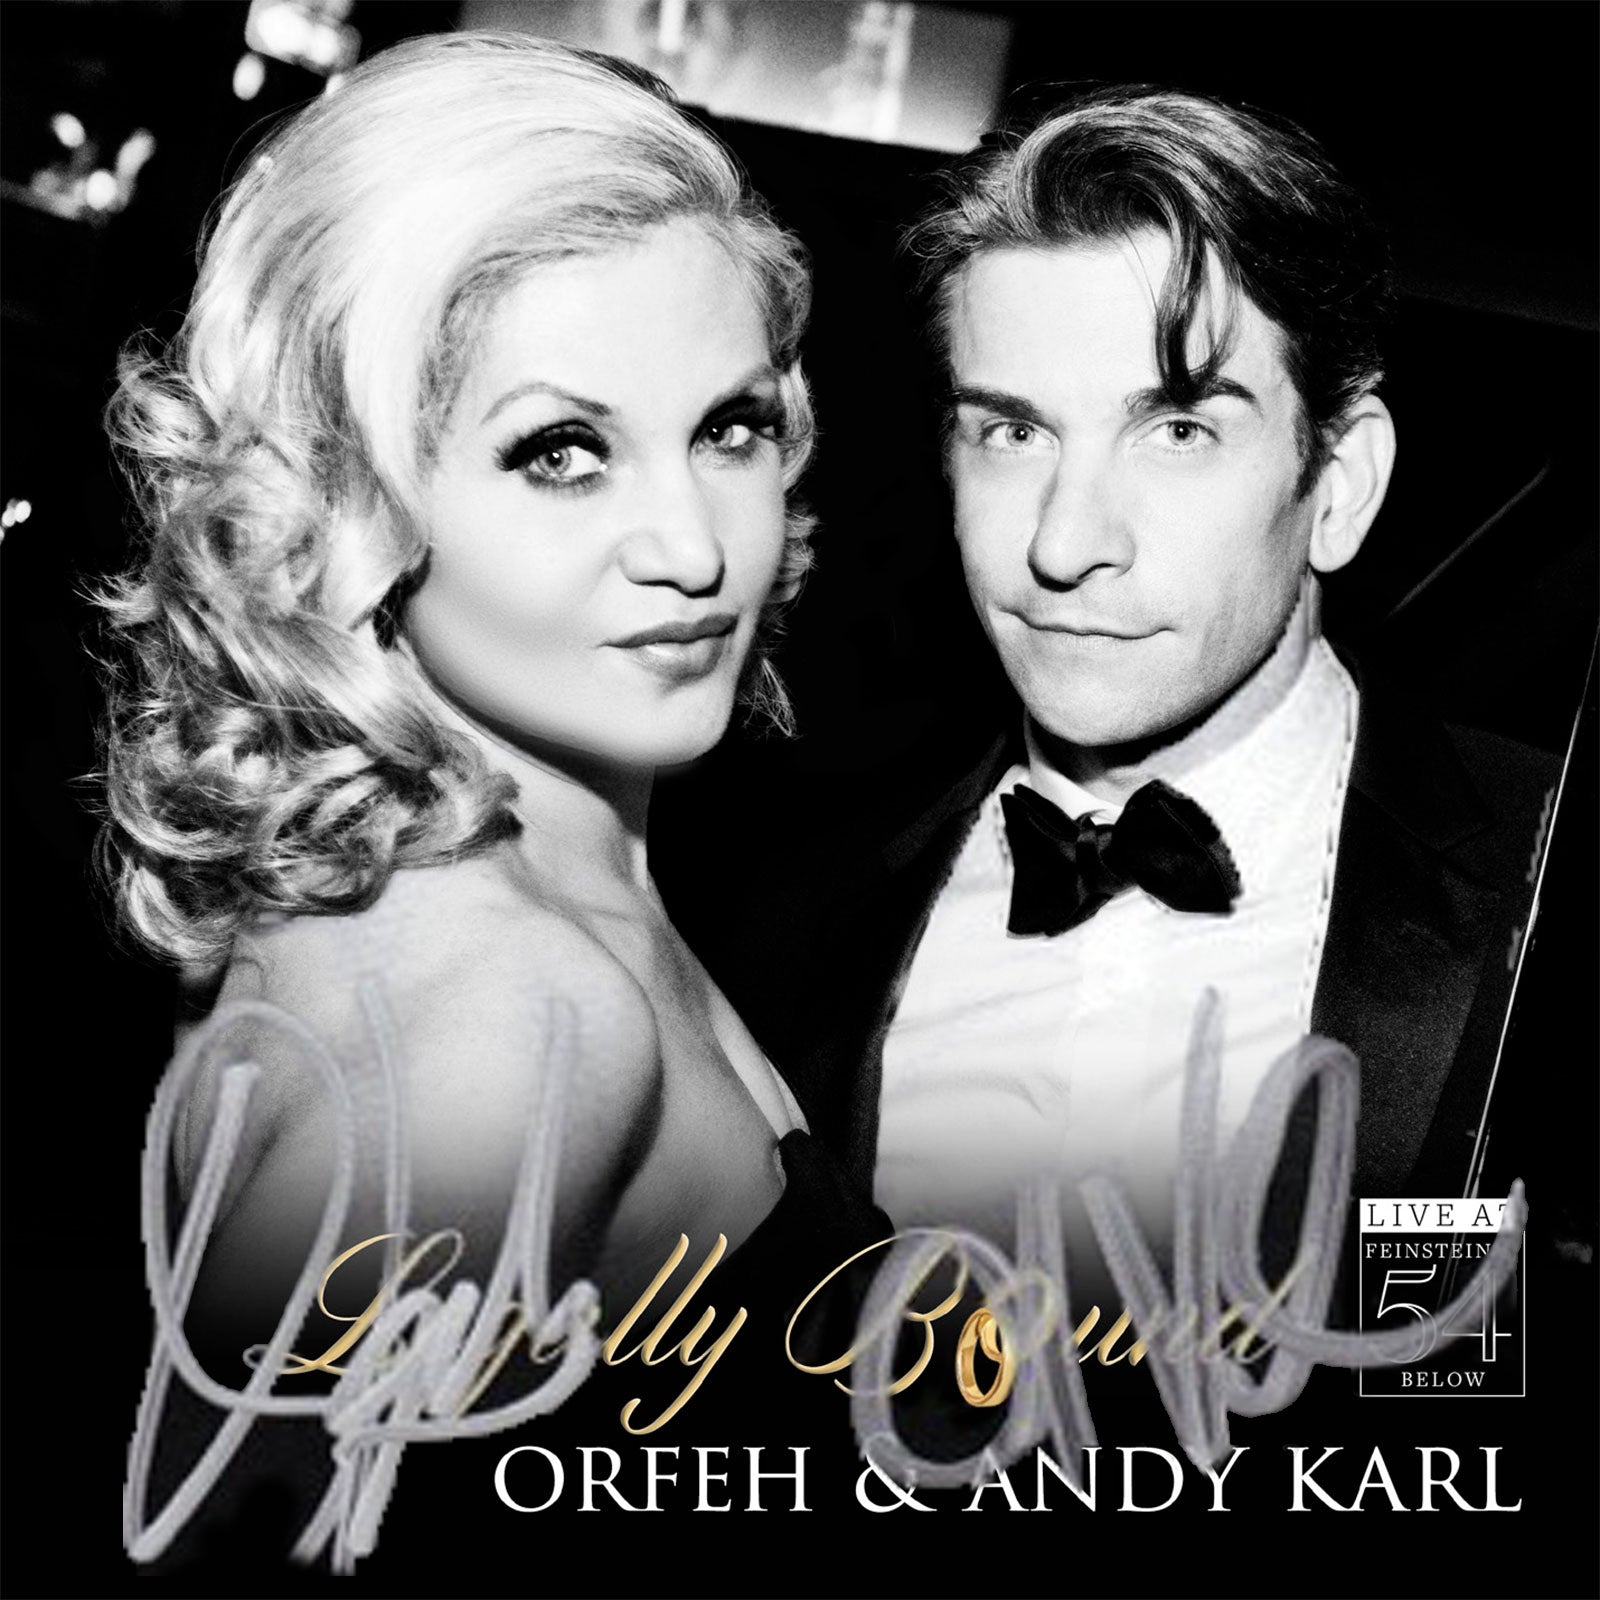 Orfeh & Andy Karl – Legally Bound [Signed CD]